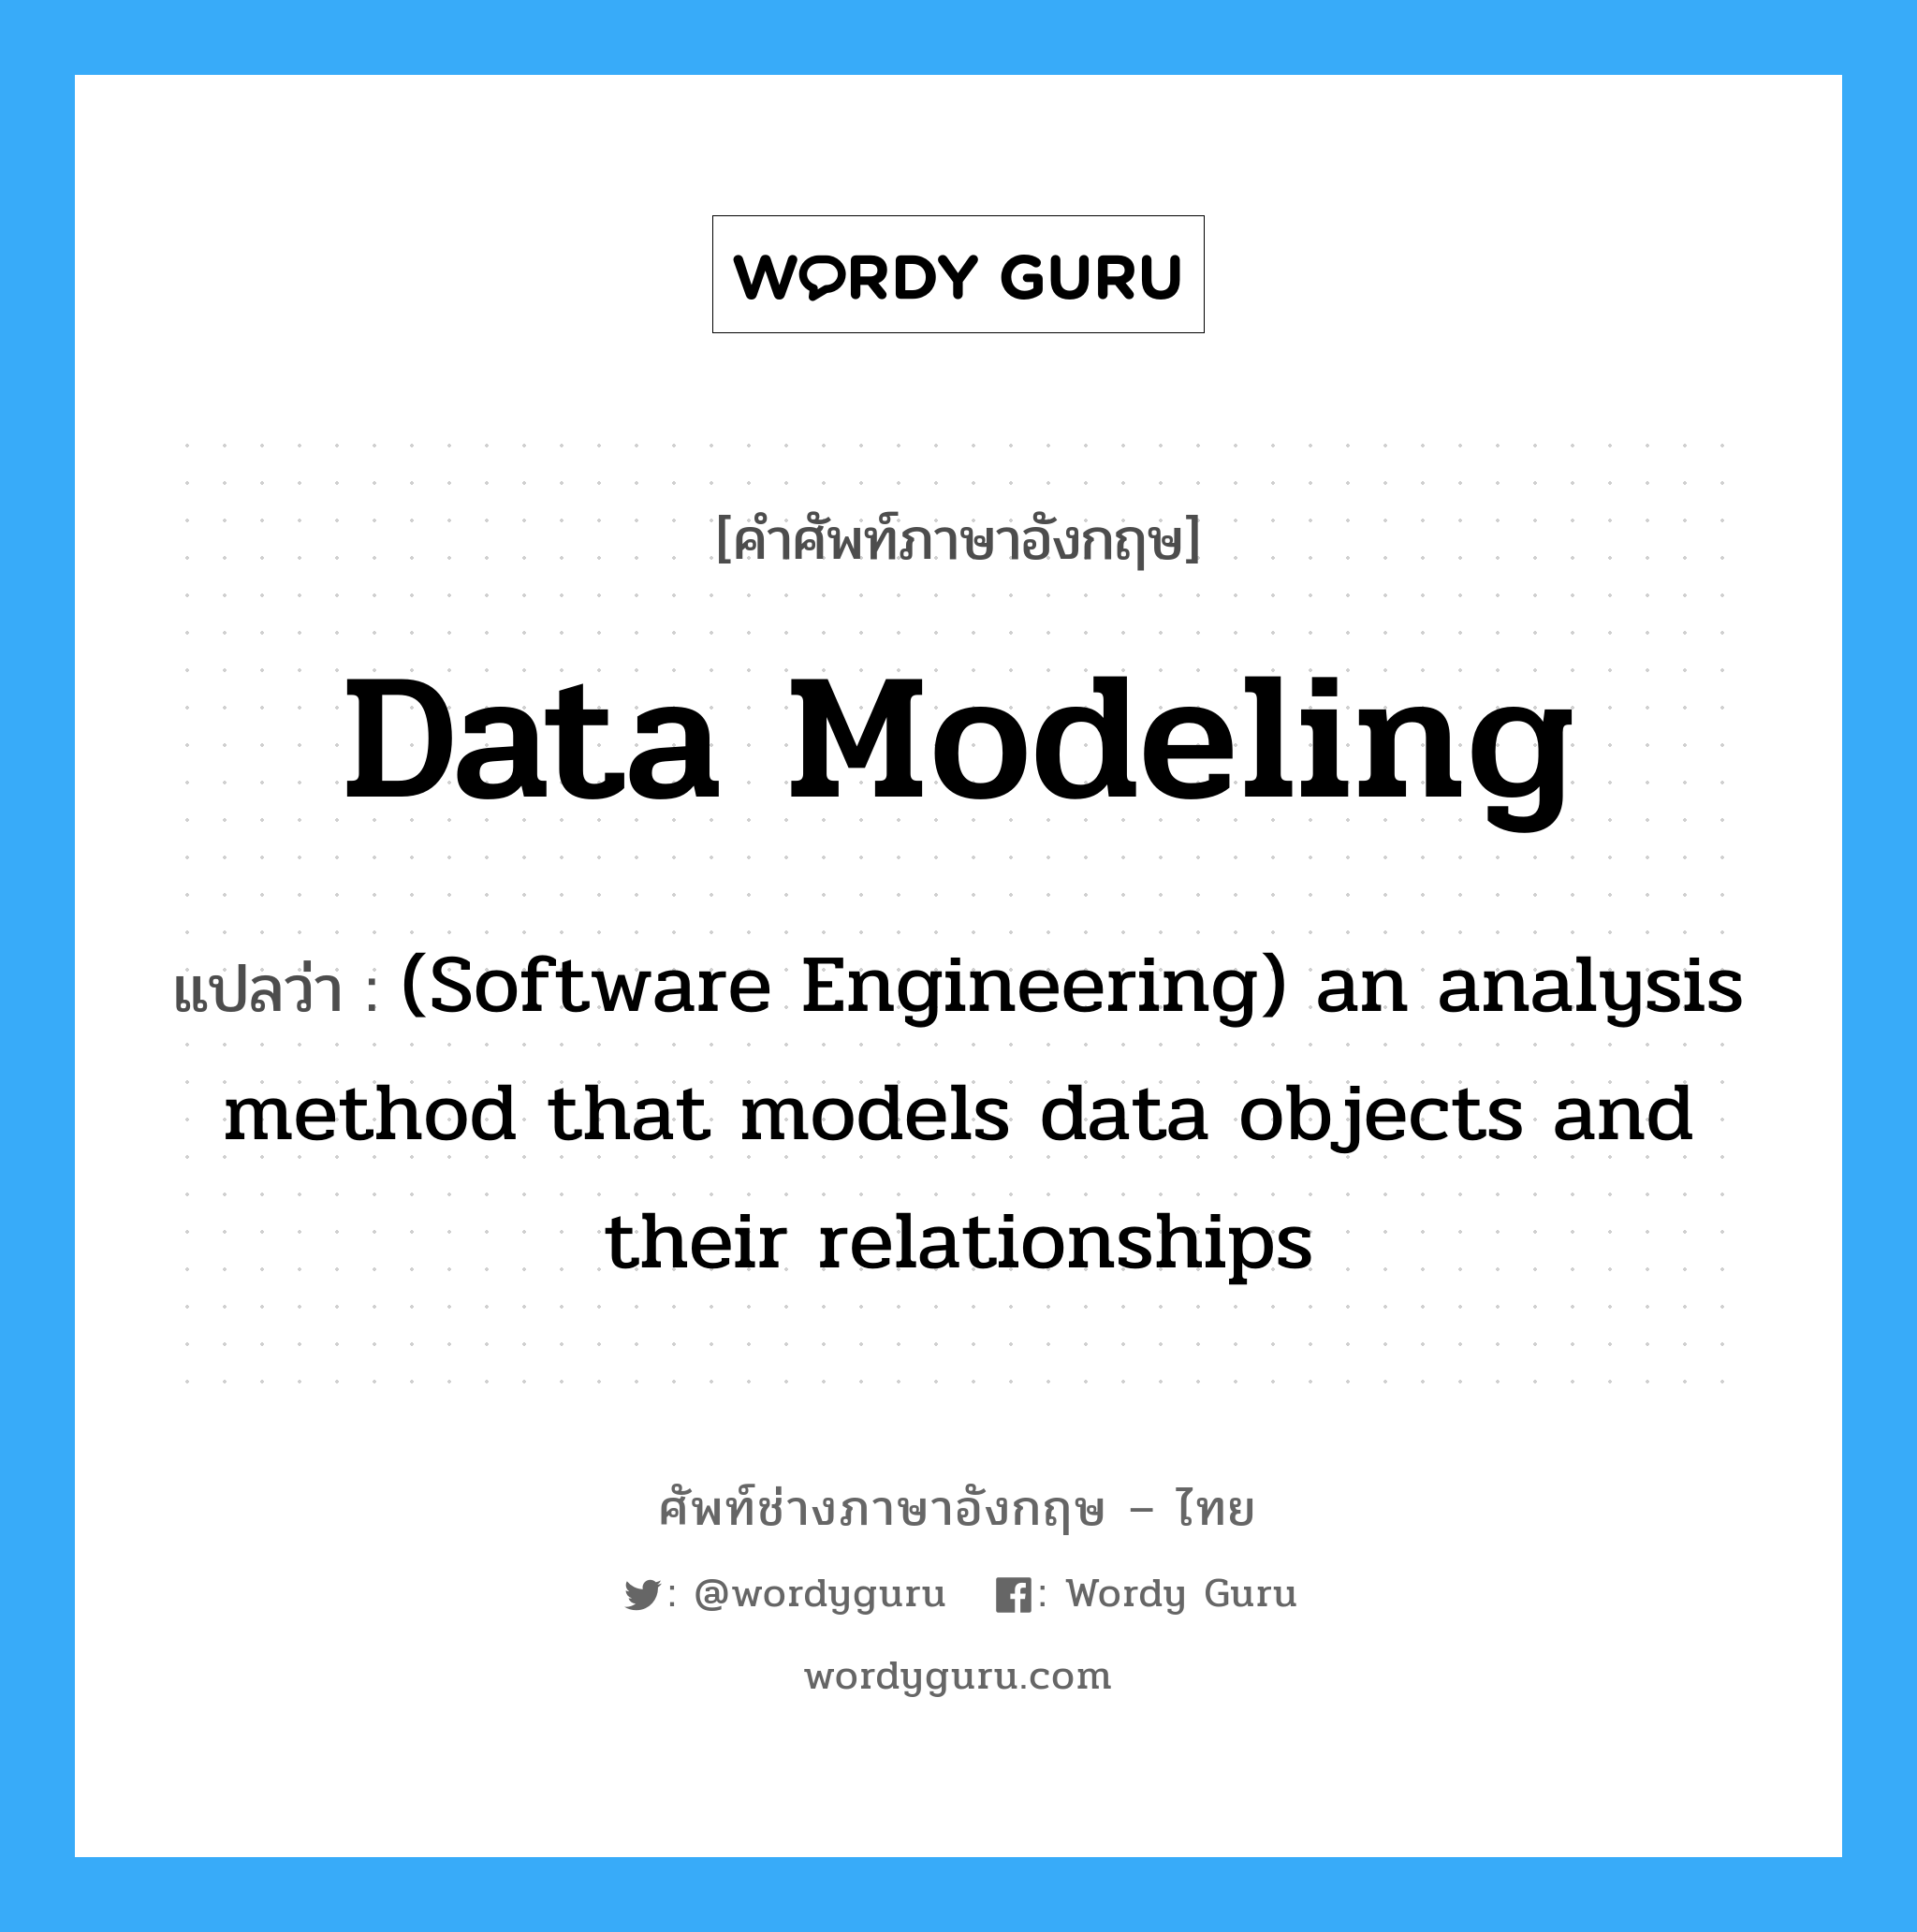 Data modeling แปลว่า?, คำศัพท์ช่างภาษาอังกฤษ - ไทย Data modeling คำศัพท์ภาษาอังกฤษ Data modeling แปลว่า (Software Engineering) an analysis method that models data objects and their relationships